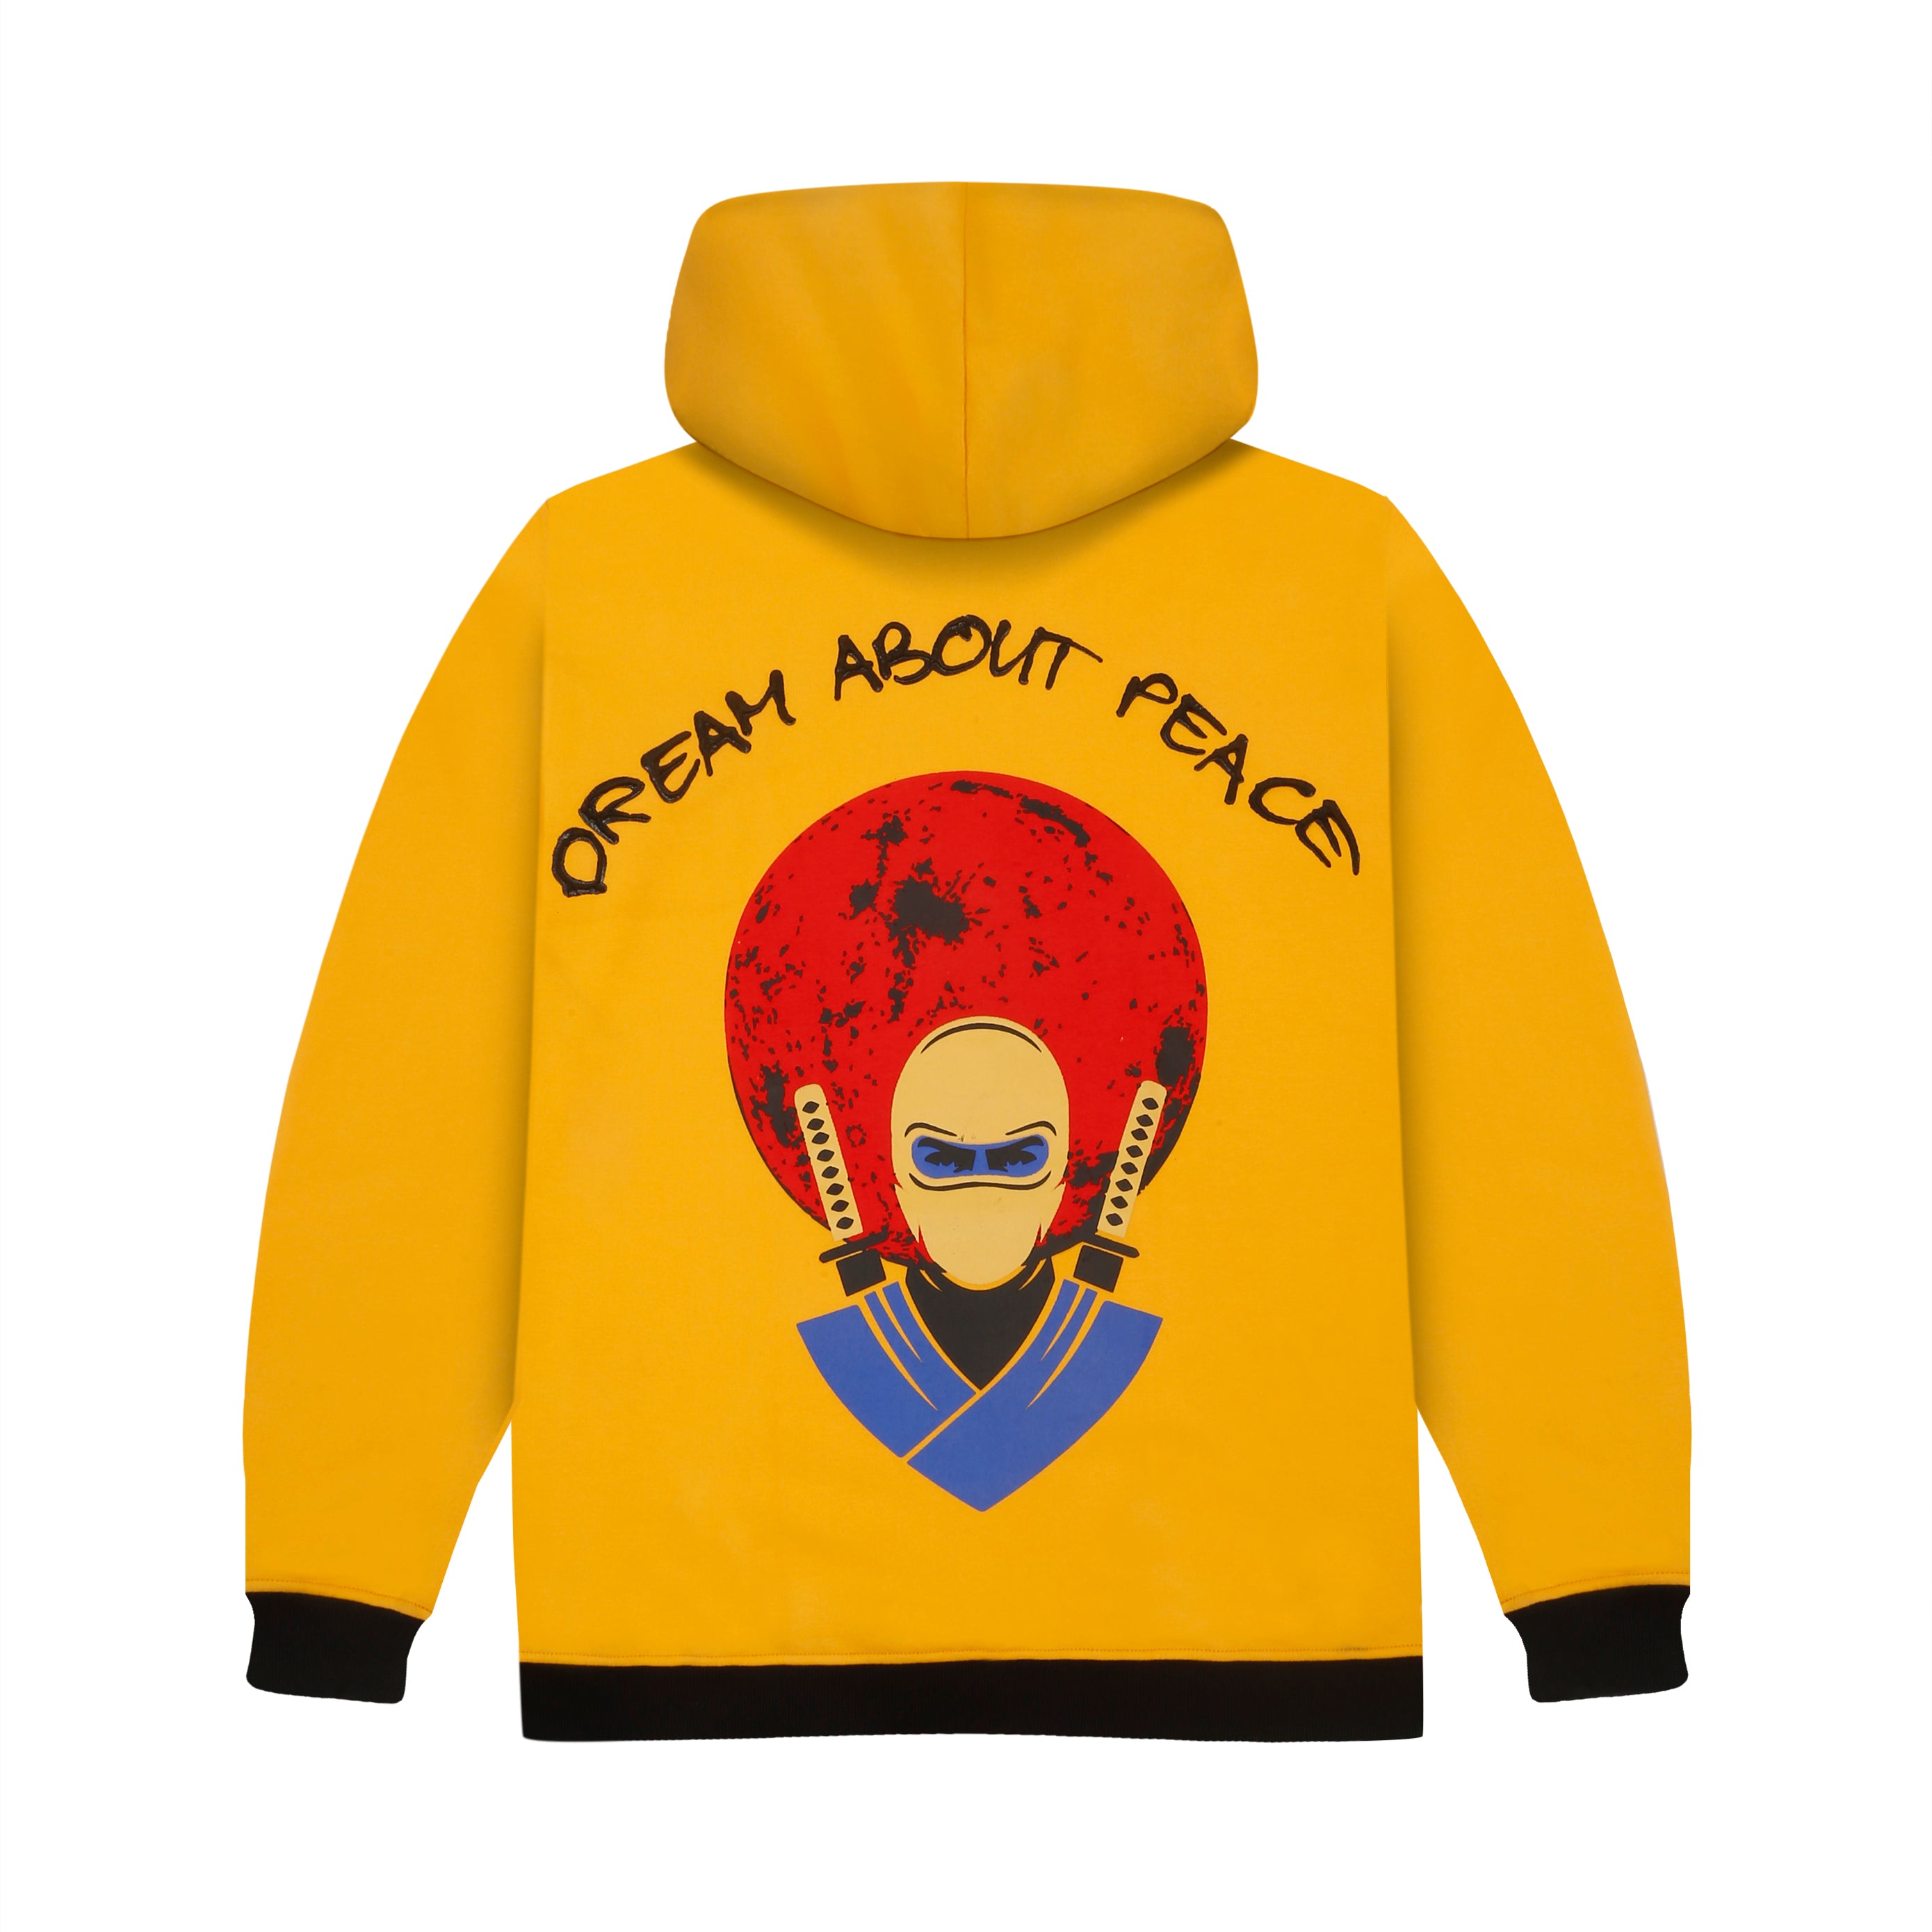 Dream About Peace Hoodie